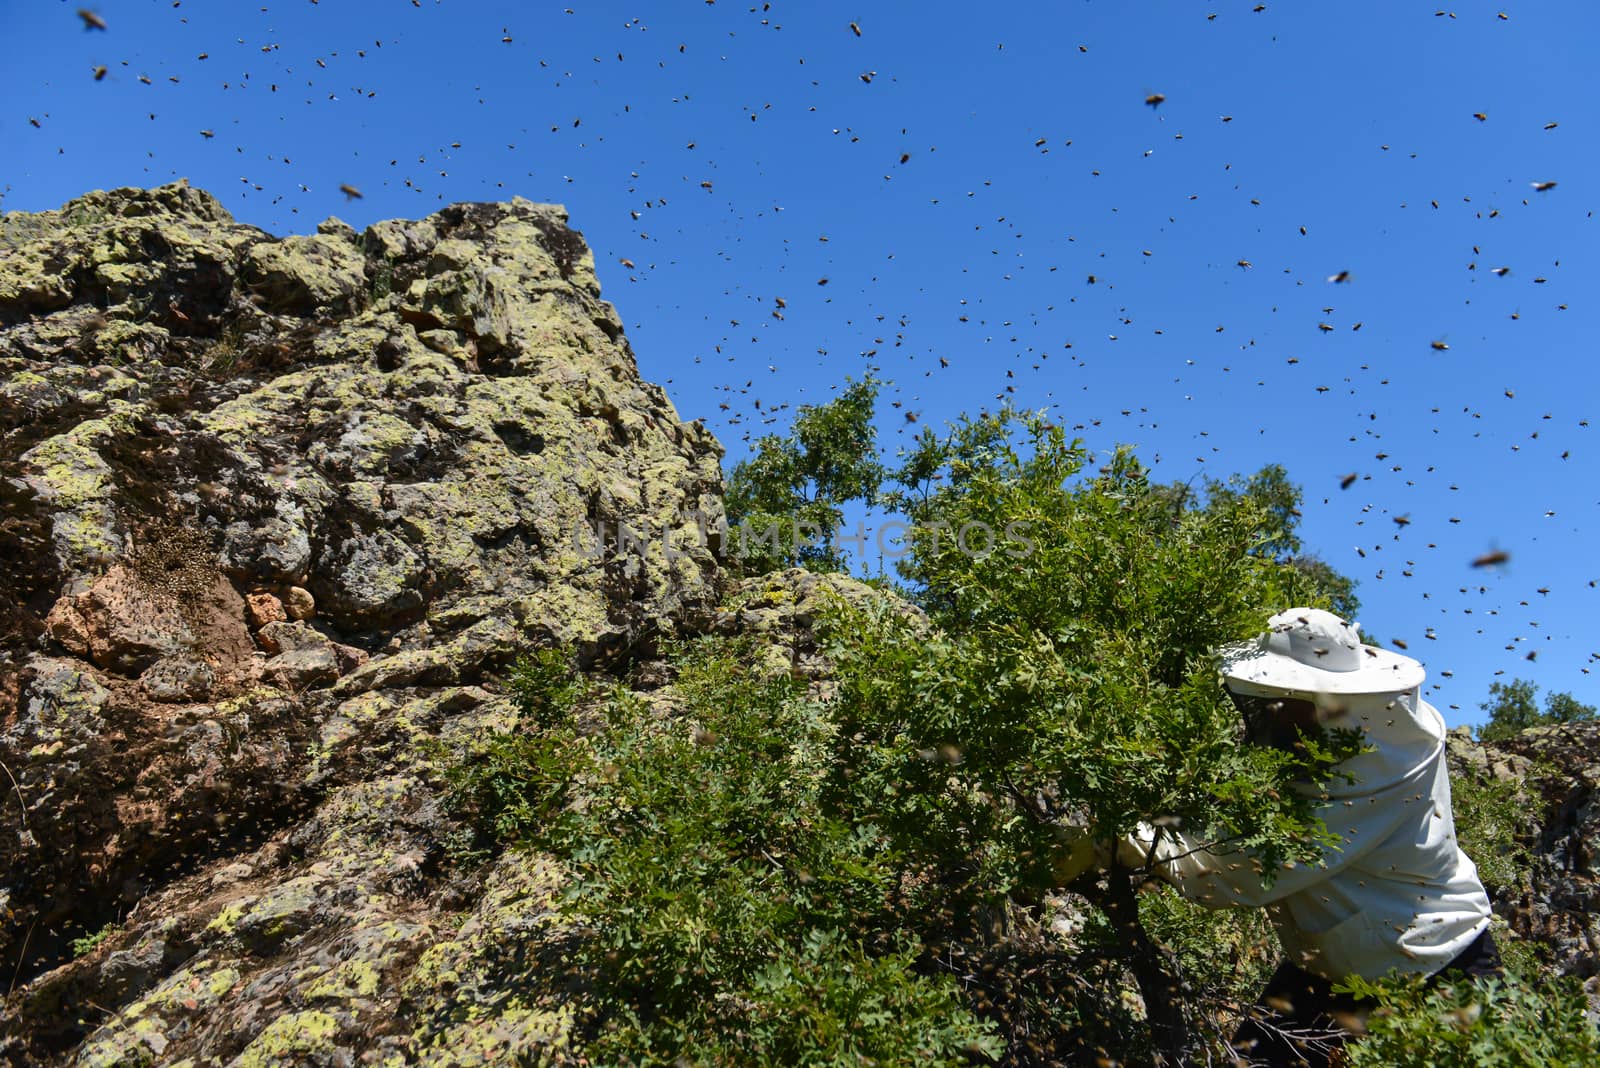 Swarms of aggressive bees by crazymedia007